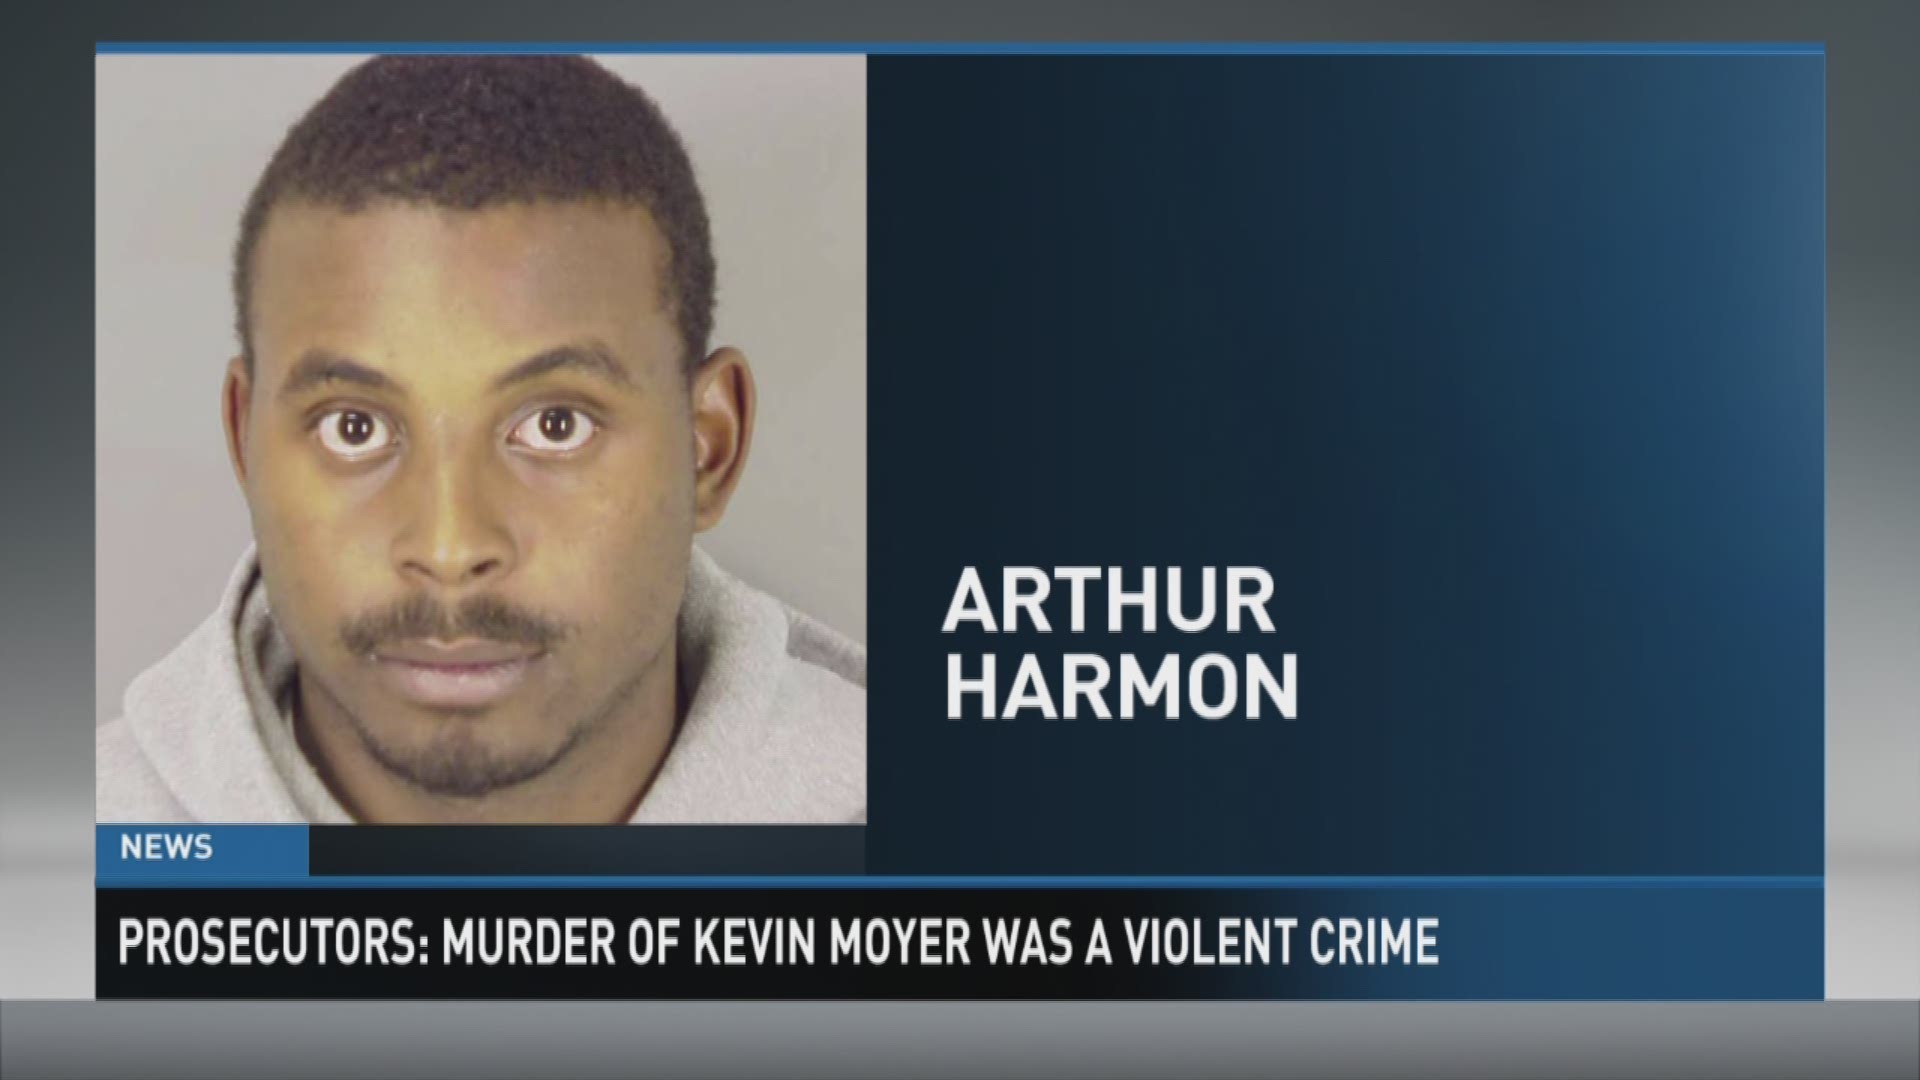 Prosecutors say the 2014 murder of Kevin Moyer was a violent crime after he was lured to Beaumont through a gay dating app.